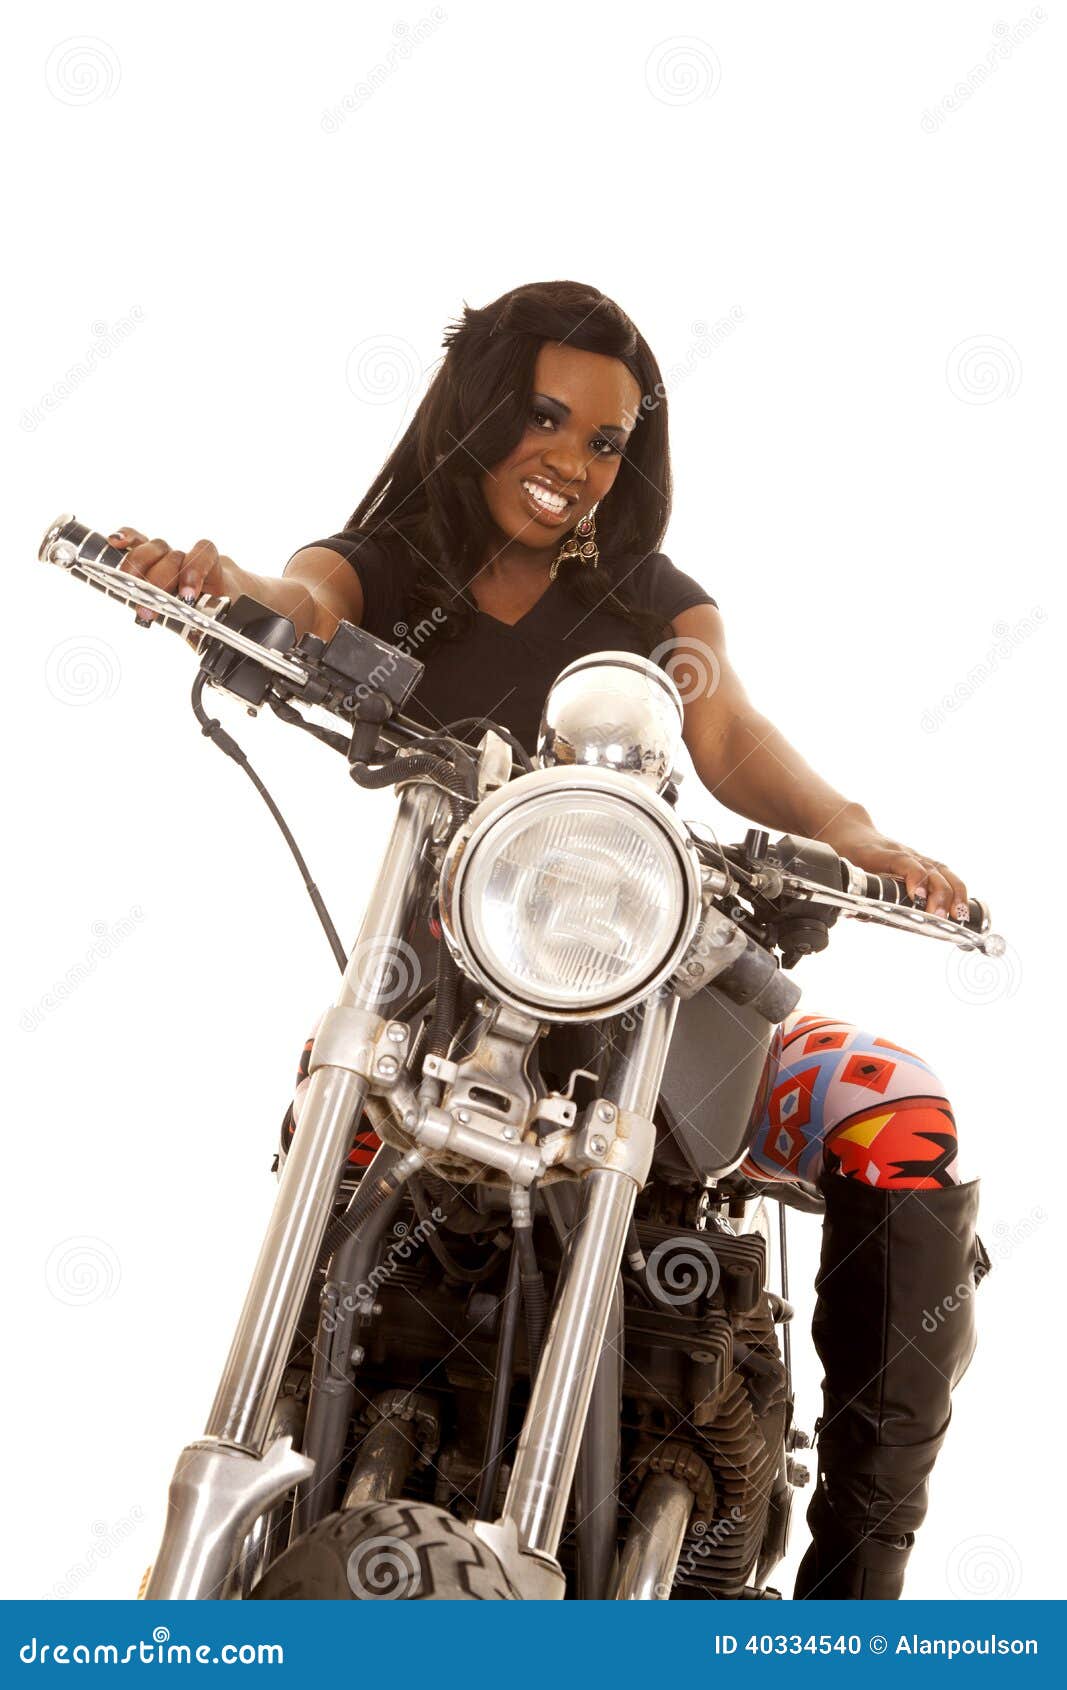 108 Leggings Motorcycle Stock Photos - Free & Royalty-Free Stock Photos  from Dreamstime